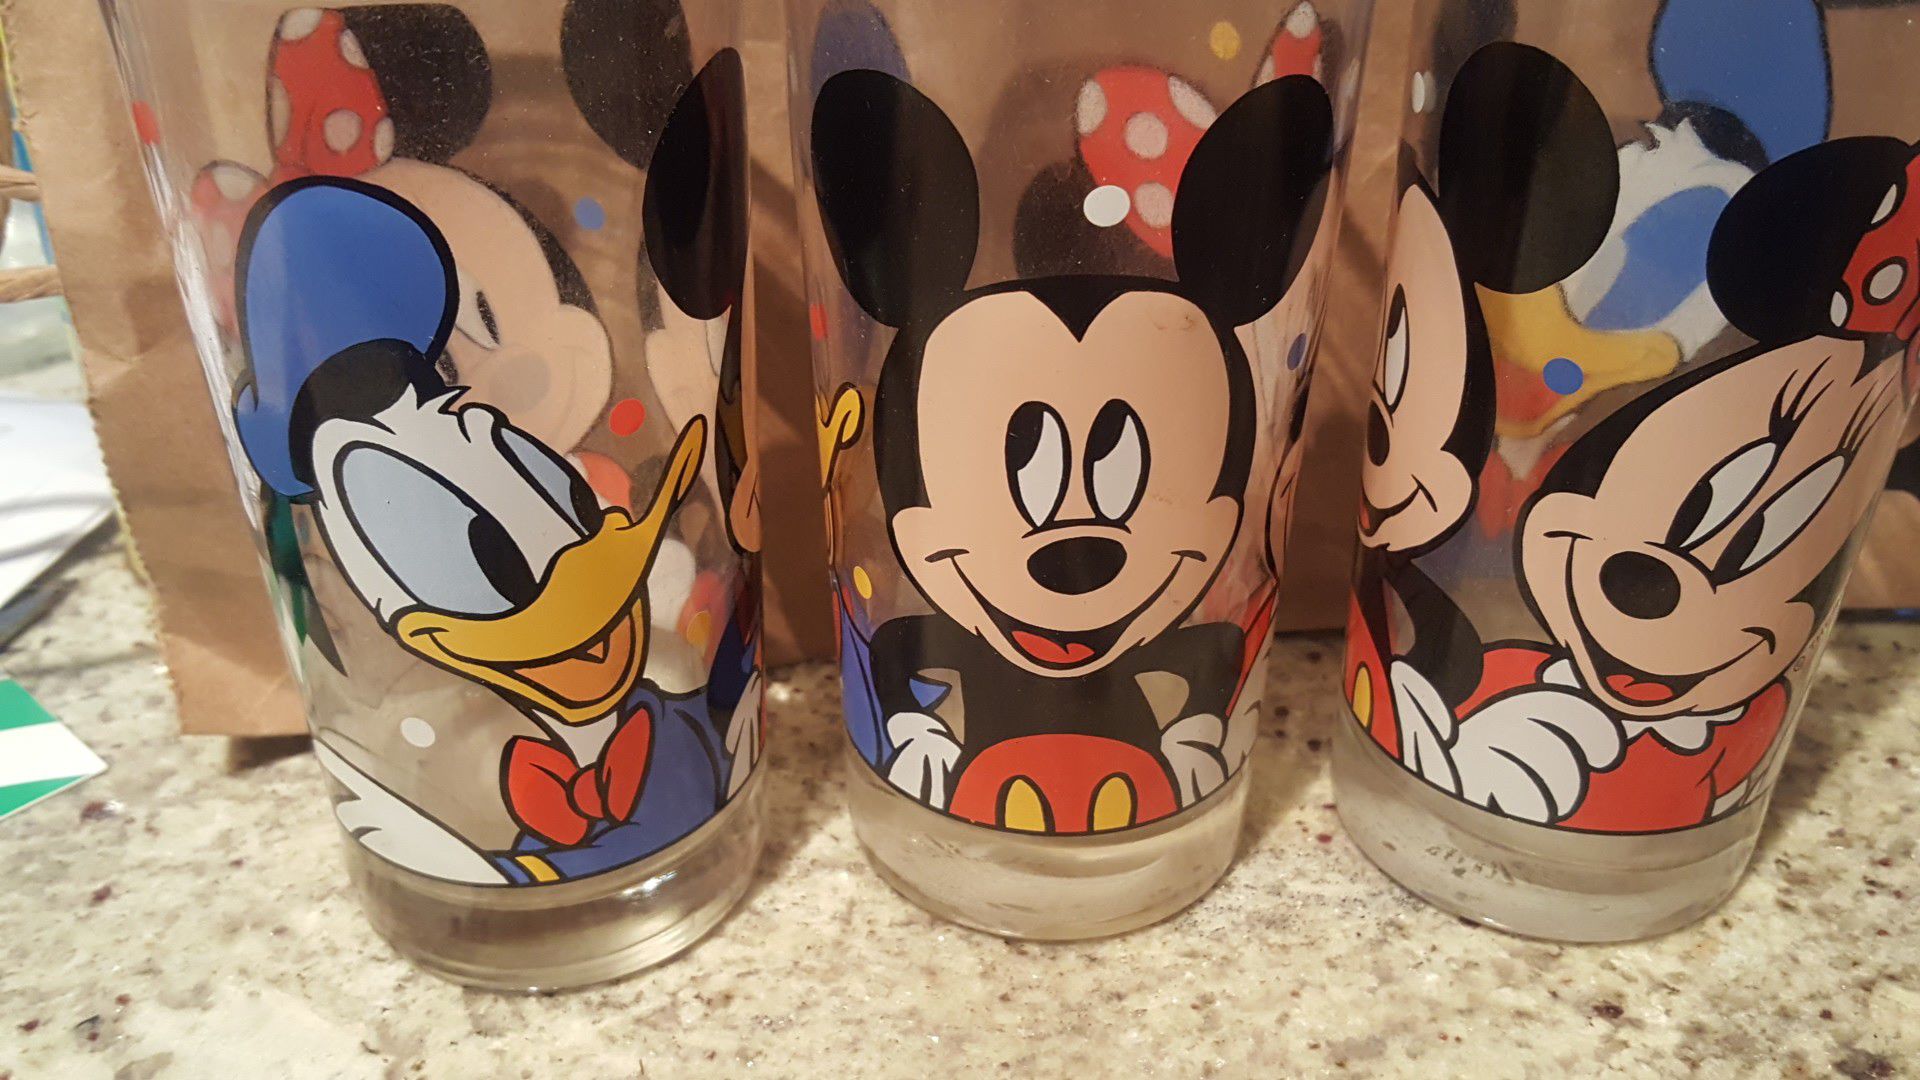 micky mouse minny mouse donald duck glassware